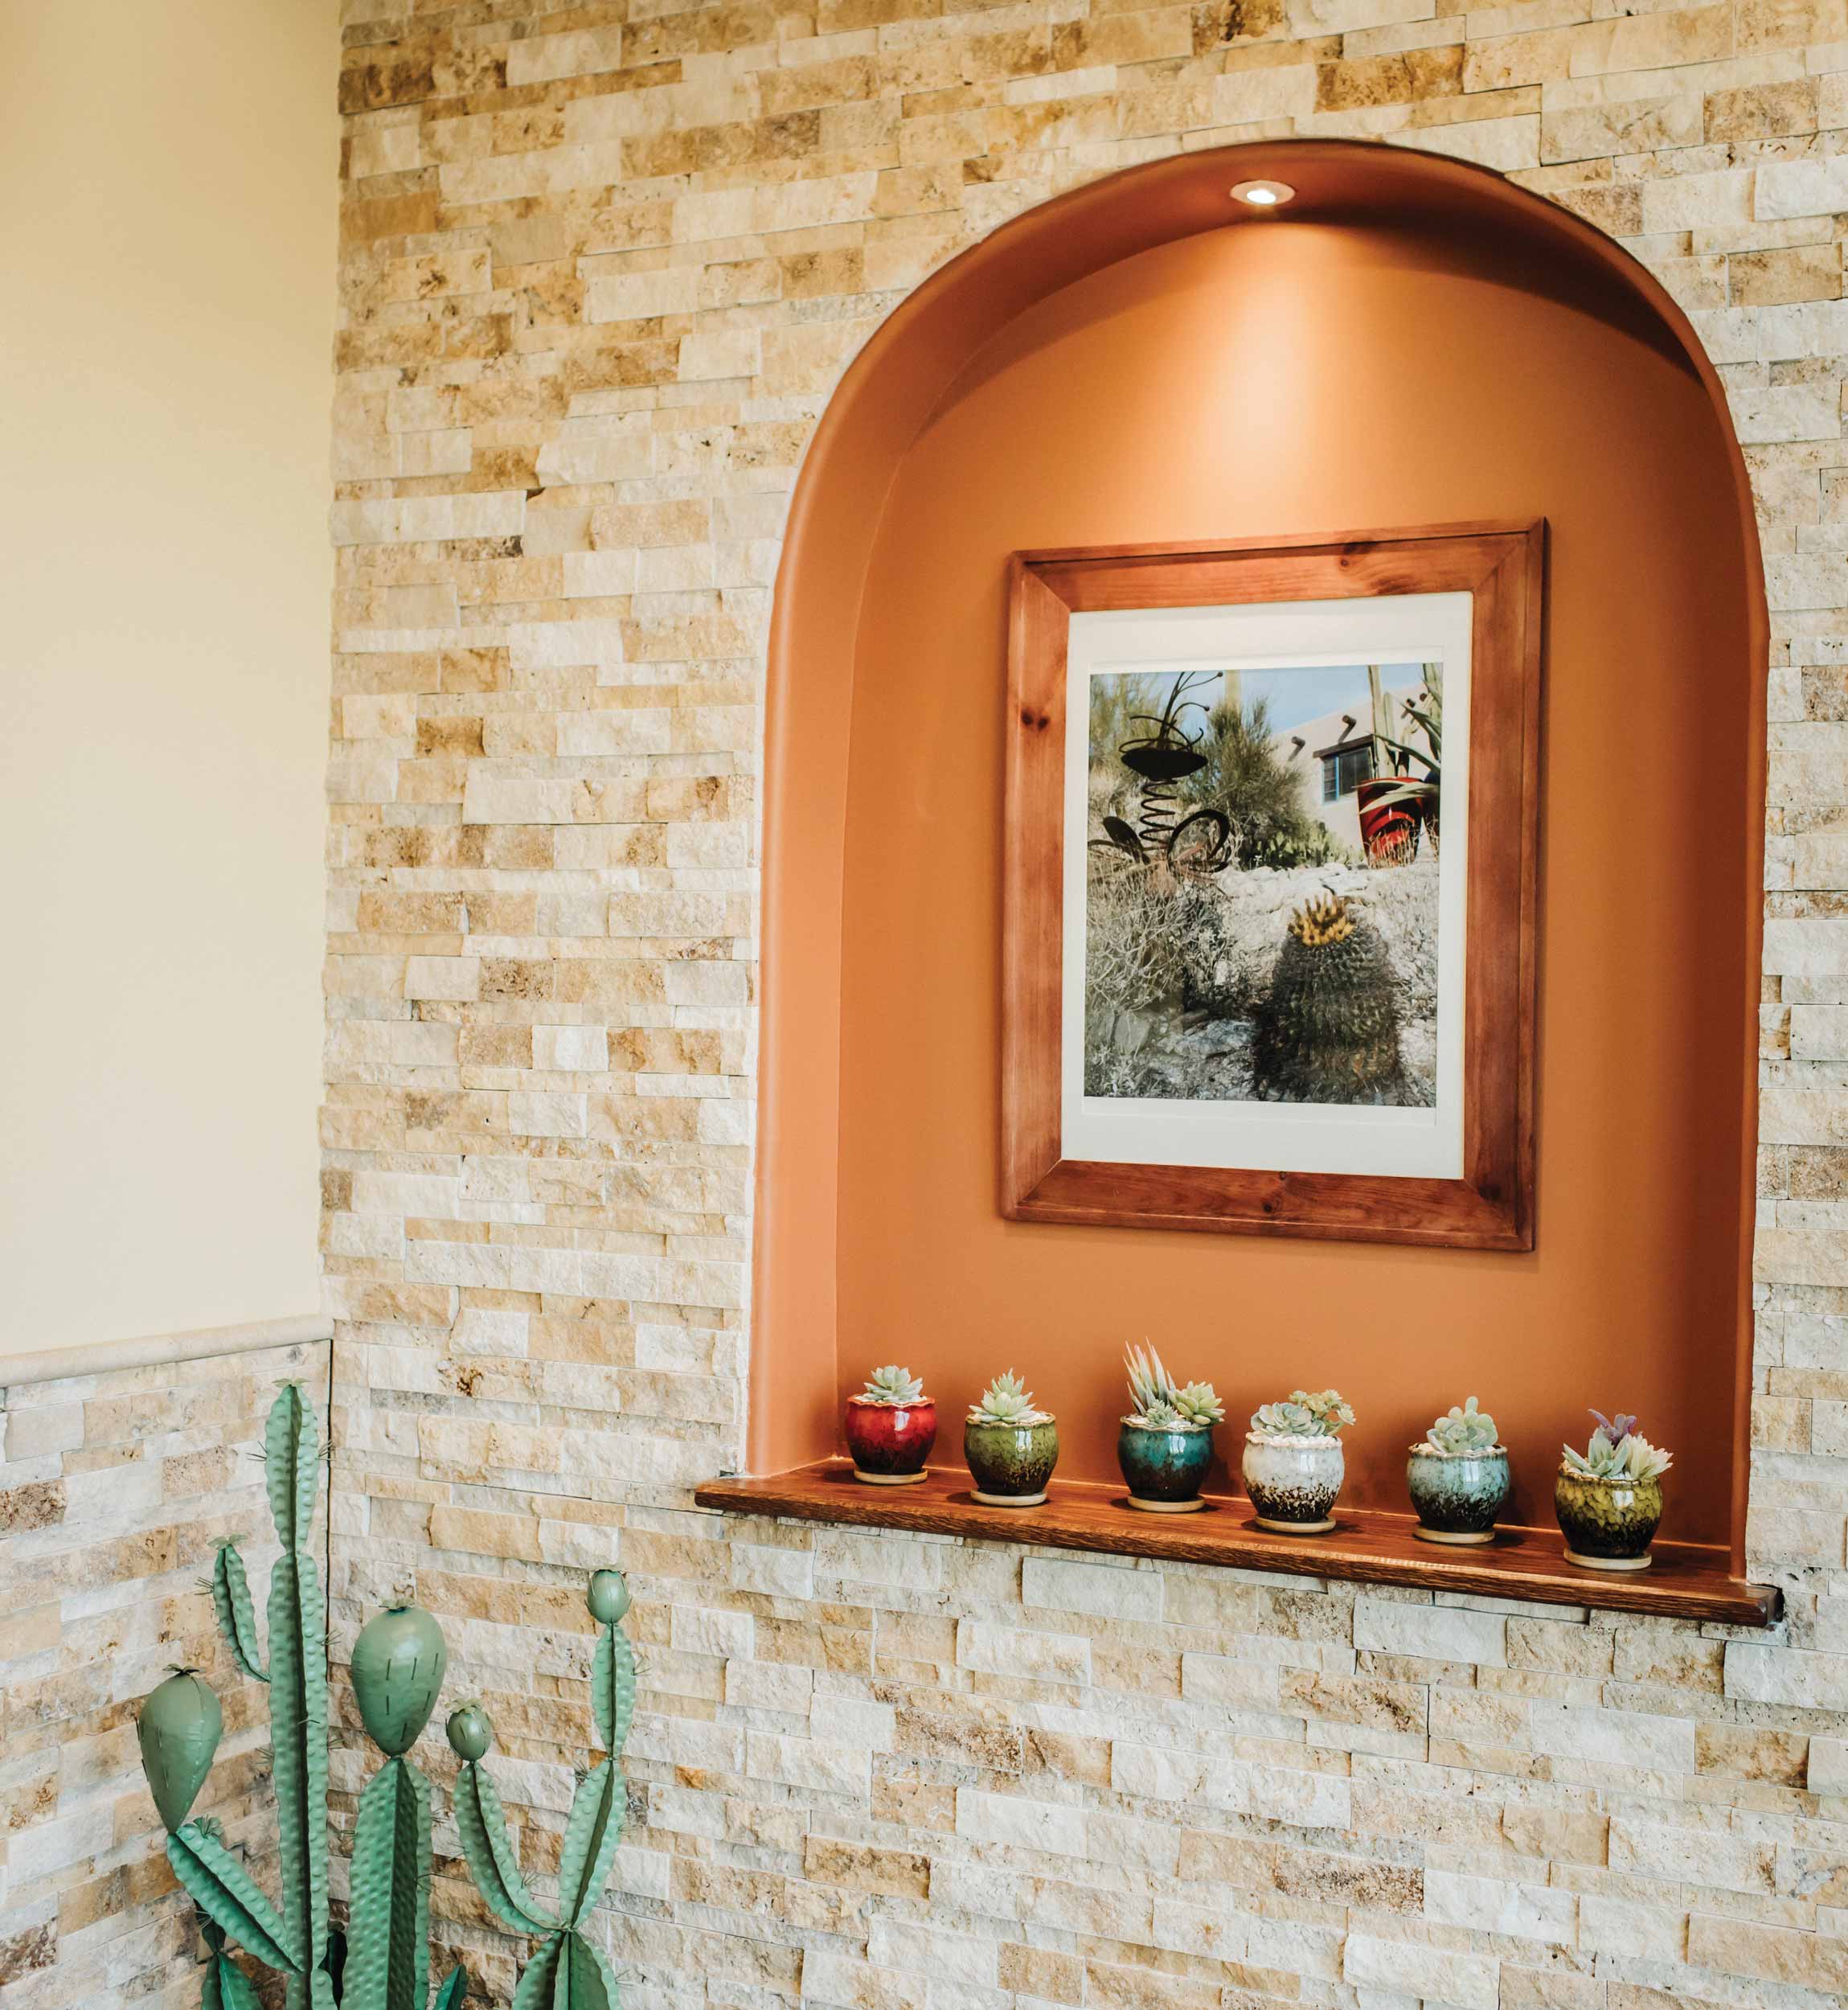 Touches of Santa Fe can be seen throughout the practice, like this niche. The rich, orange-based, clay color draws attention to the photograph showcasing southwestern architecture behind a cactus garden. Six little brightly-potted cacti dance across the shelf.